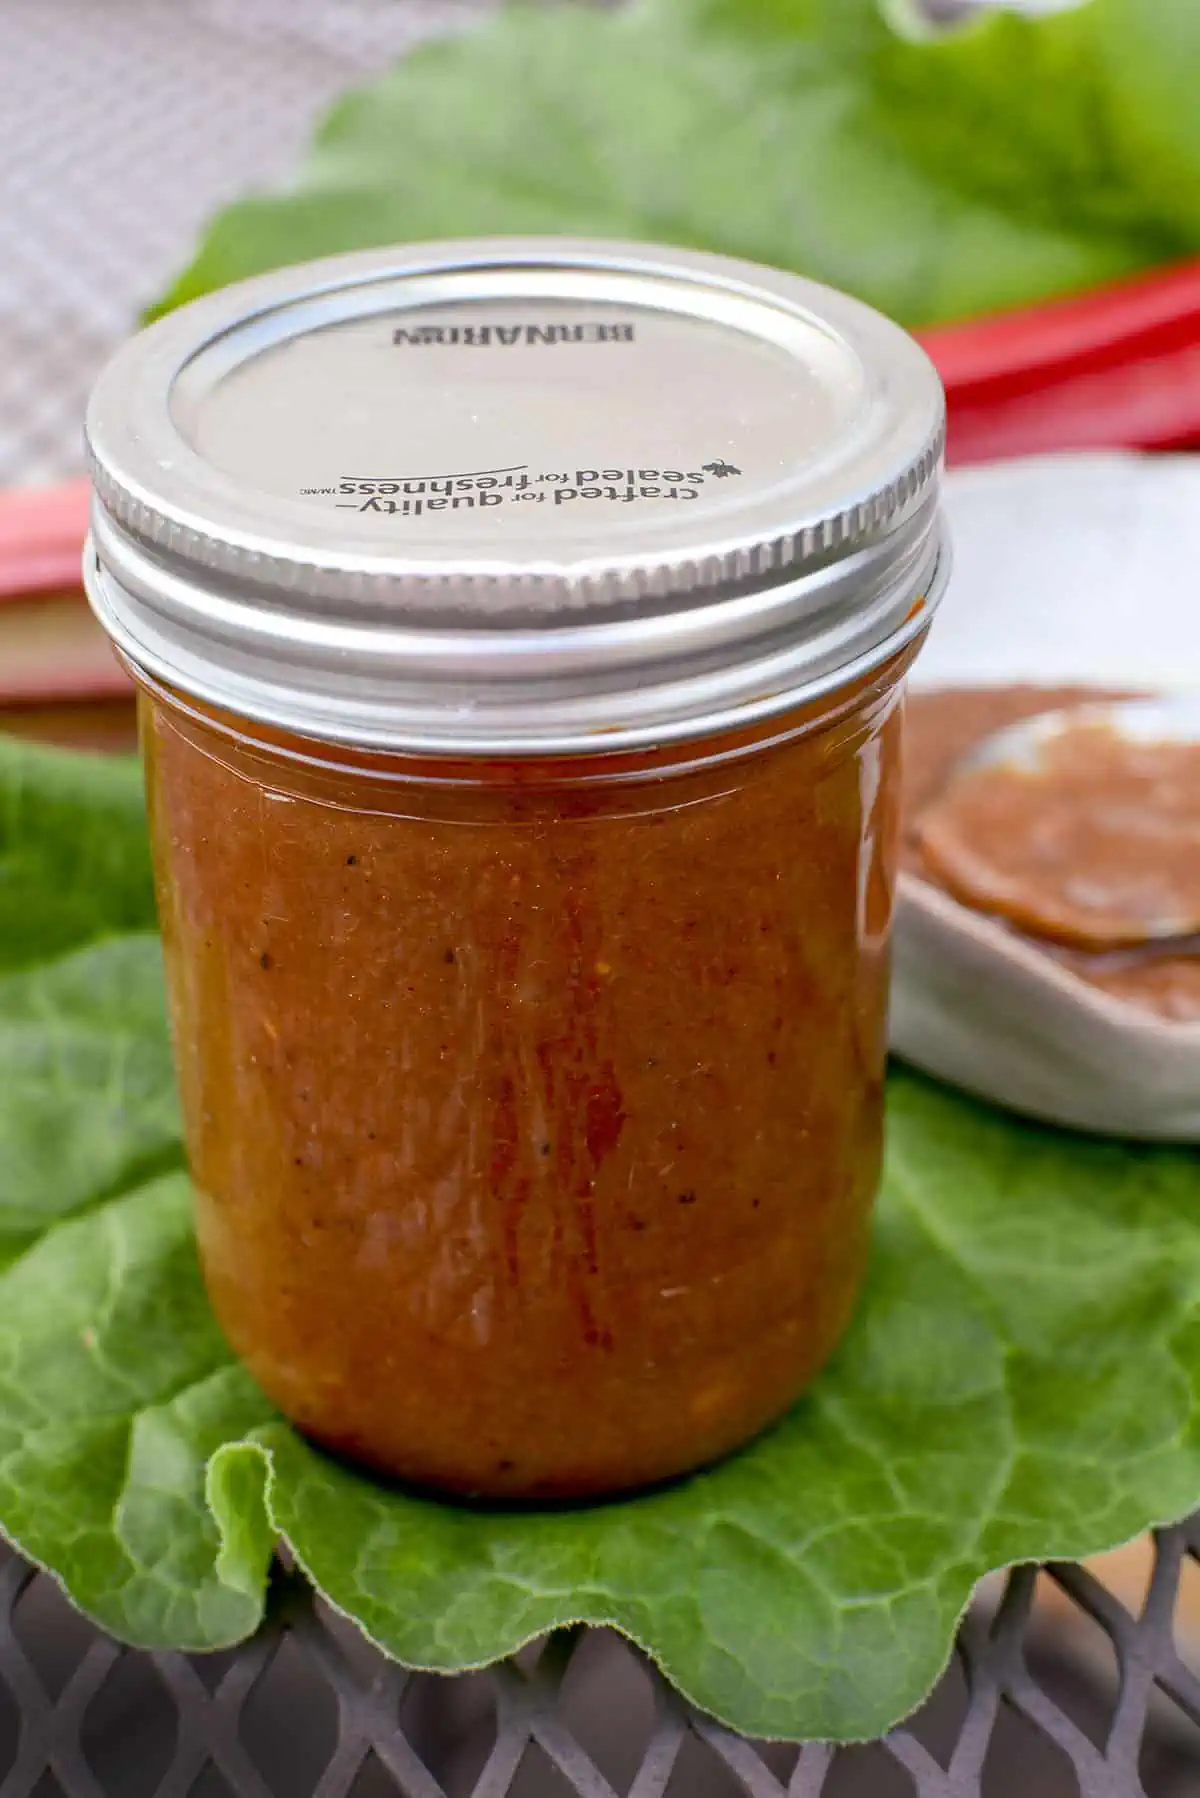 Rhubarb bbq sauce in a mason jar. The sauce is in a bowl to the upper right.